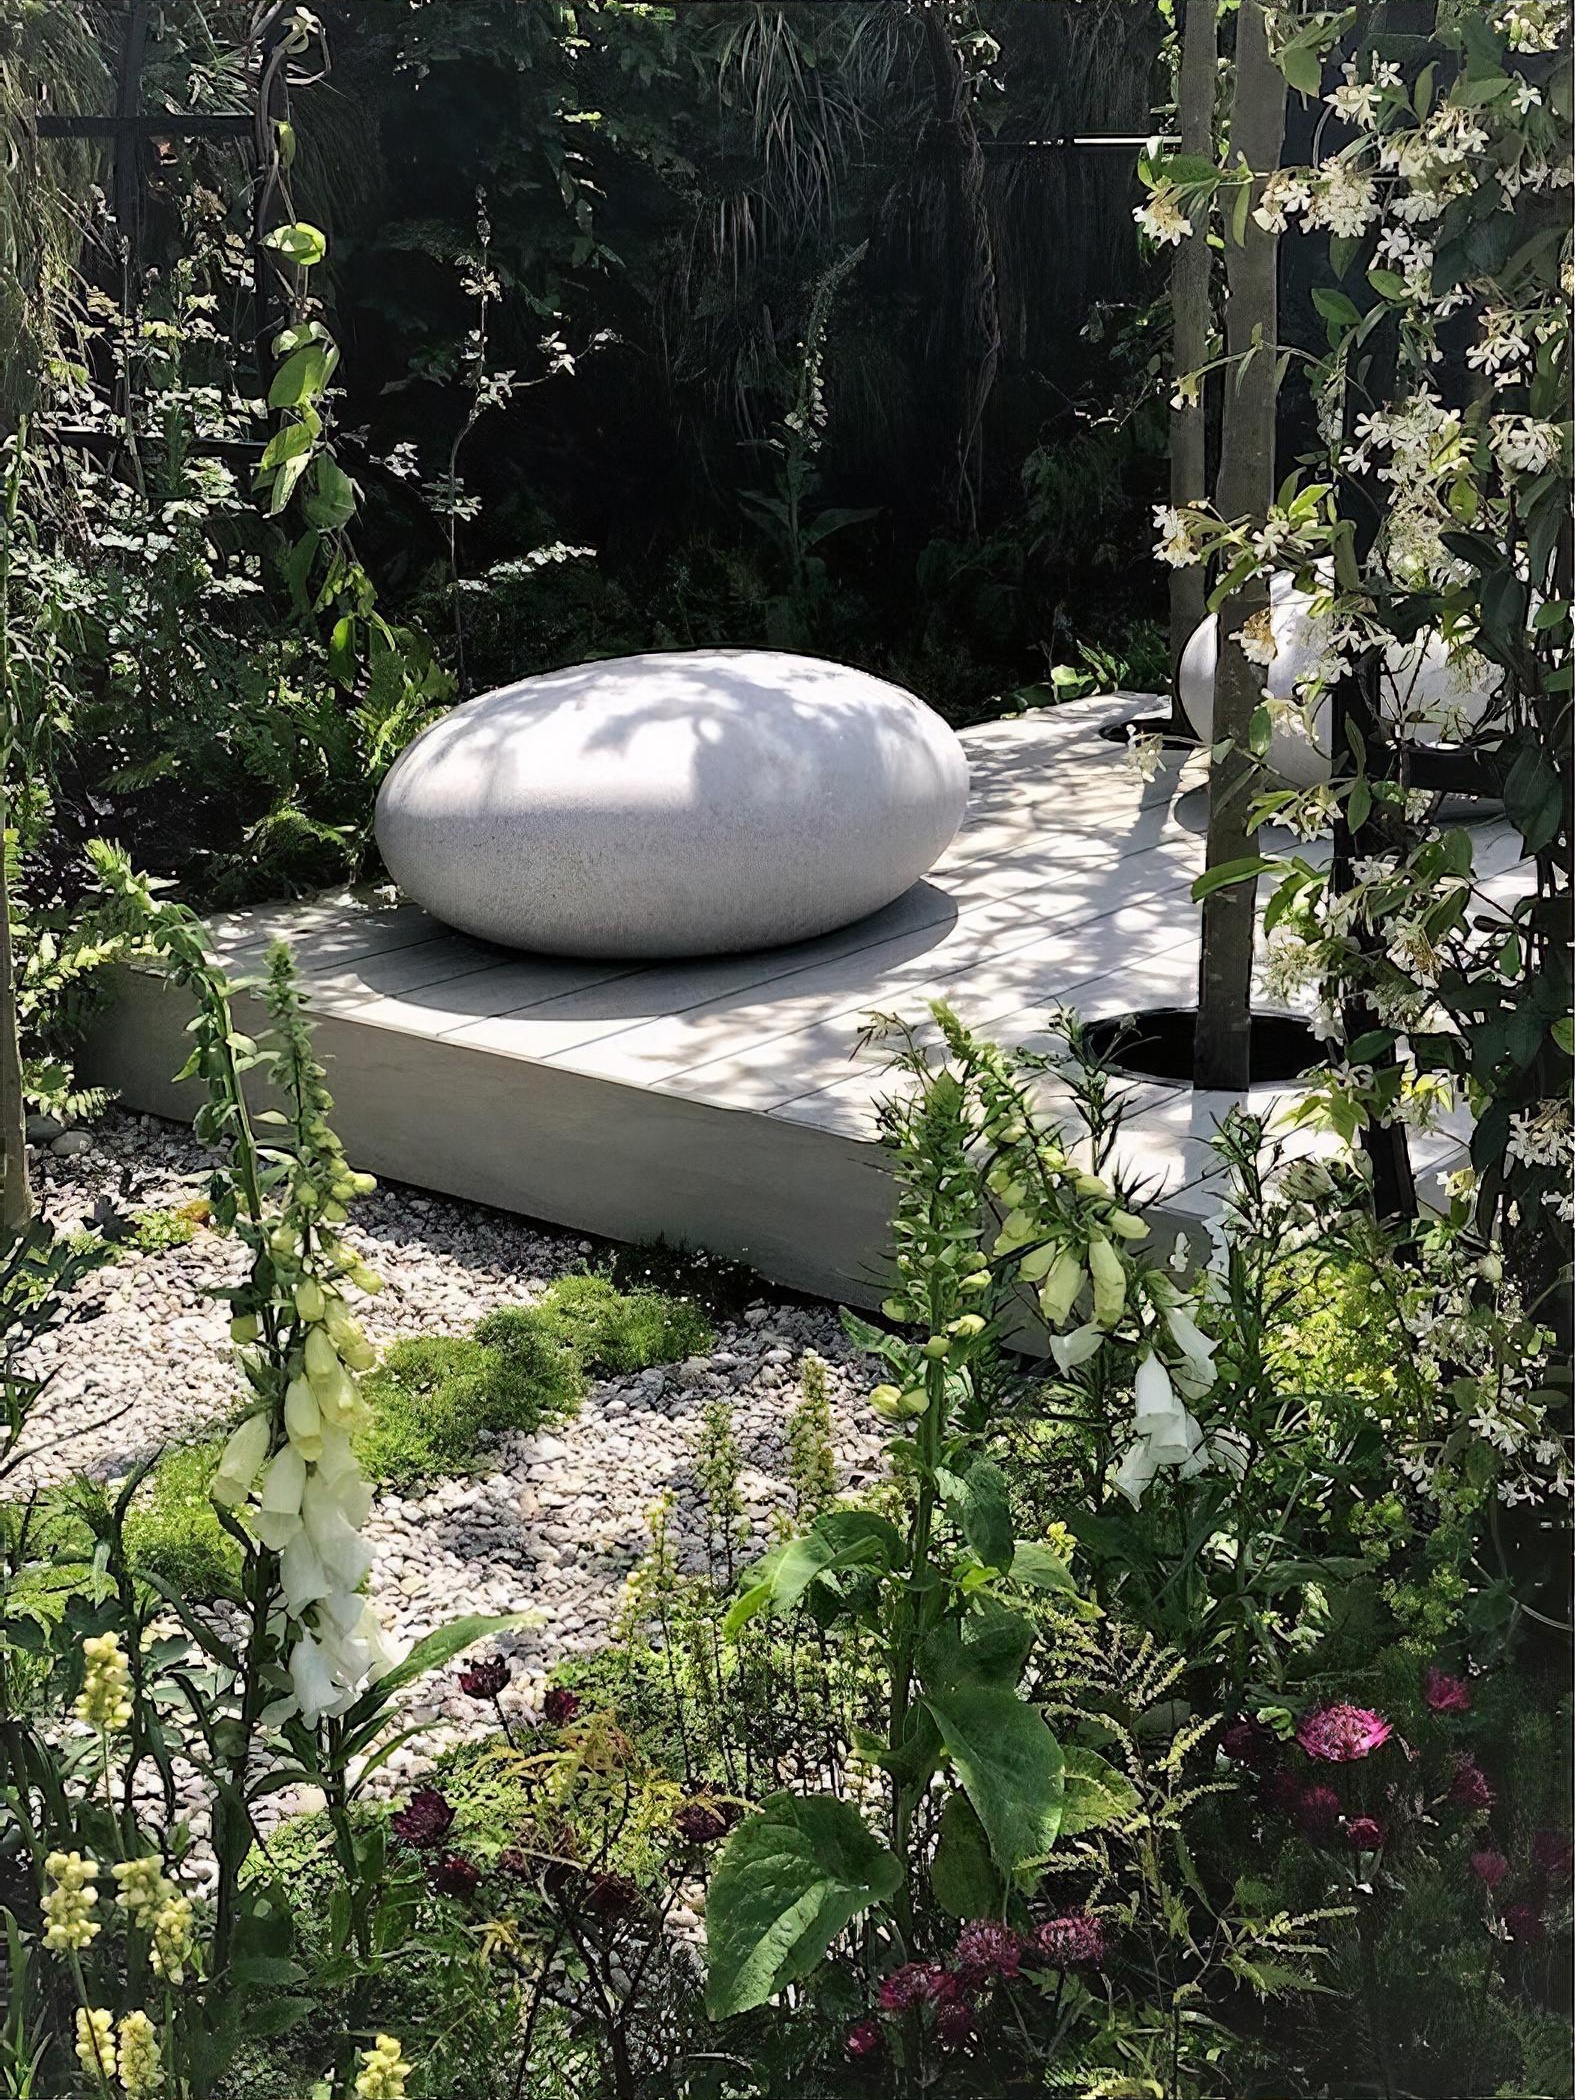 'Space Within' Mindfulness Garden Created by garden designer Rae Wilkinson the ‘Space Within’ garden at RHS Chatsworth Flower Show 2019, won an RHS Gold Medal, Best in Category and People’s Choice awards.